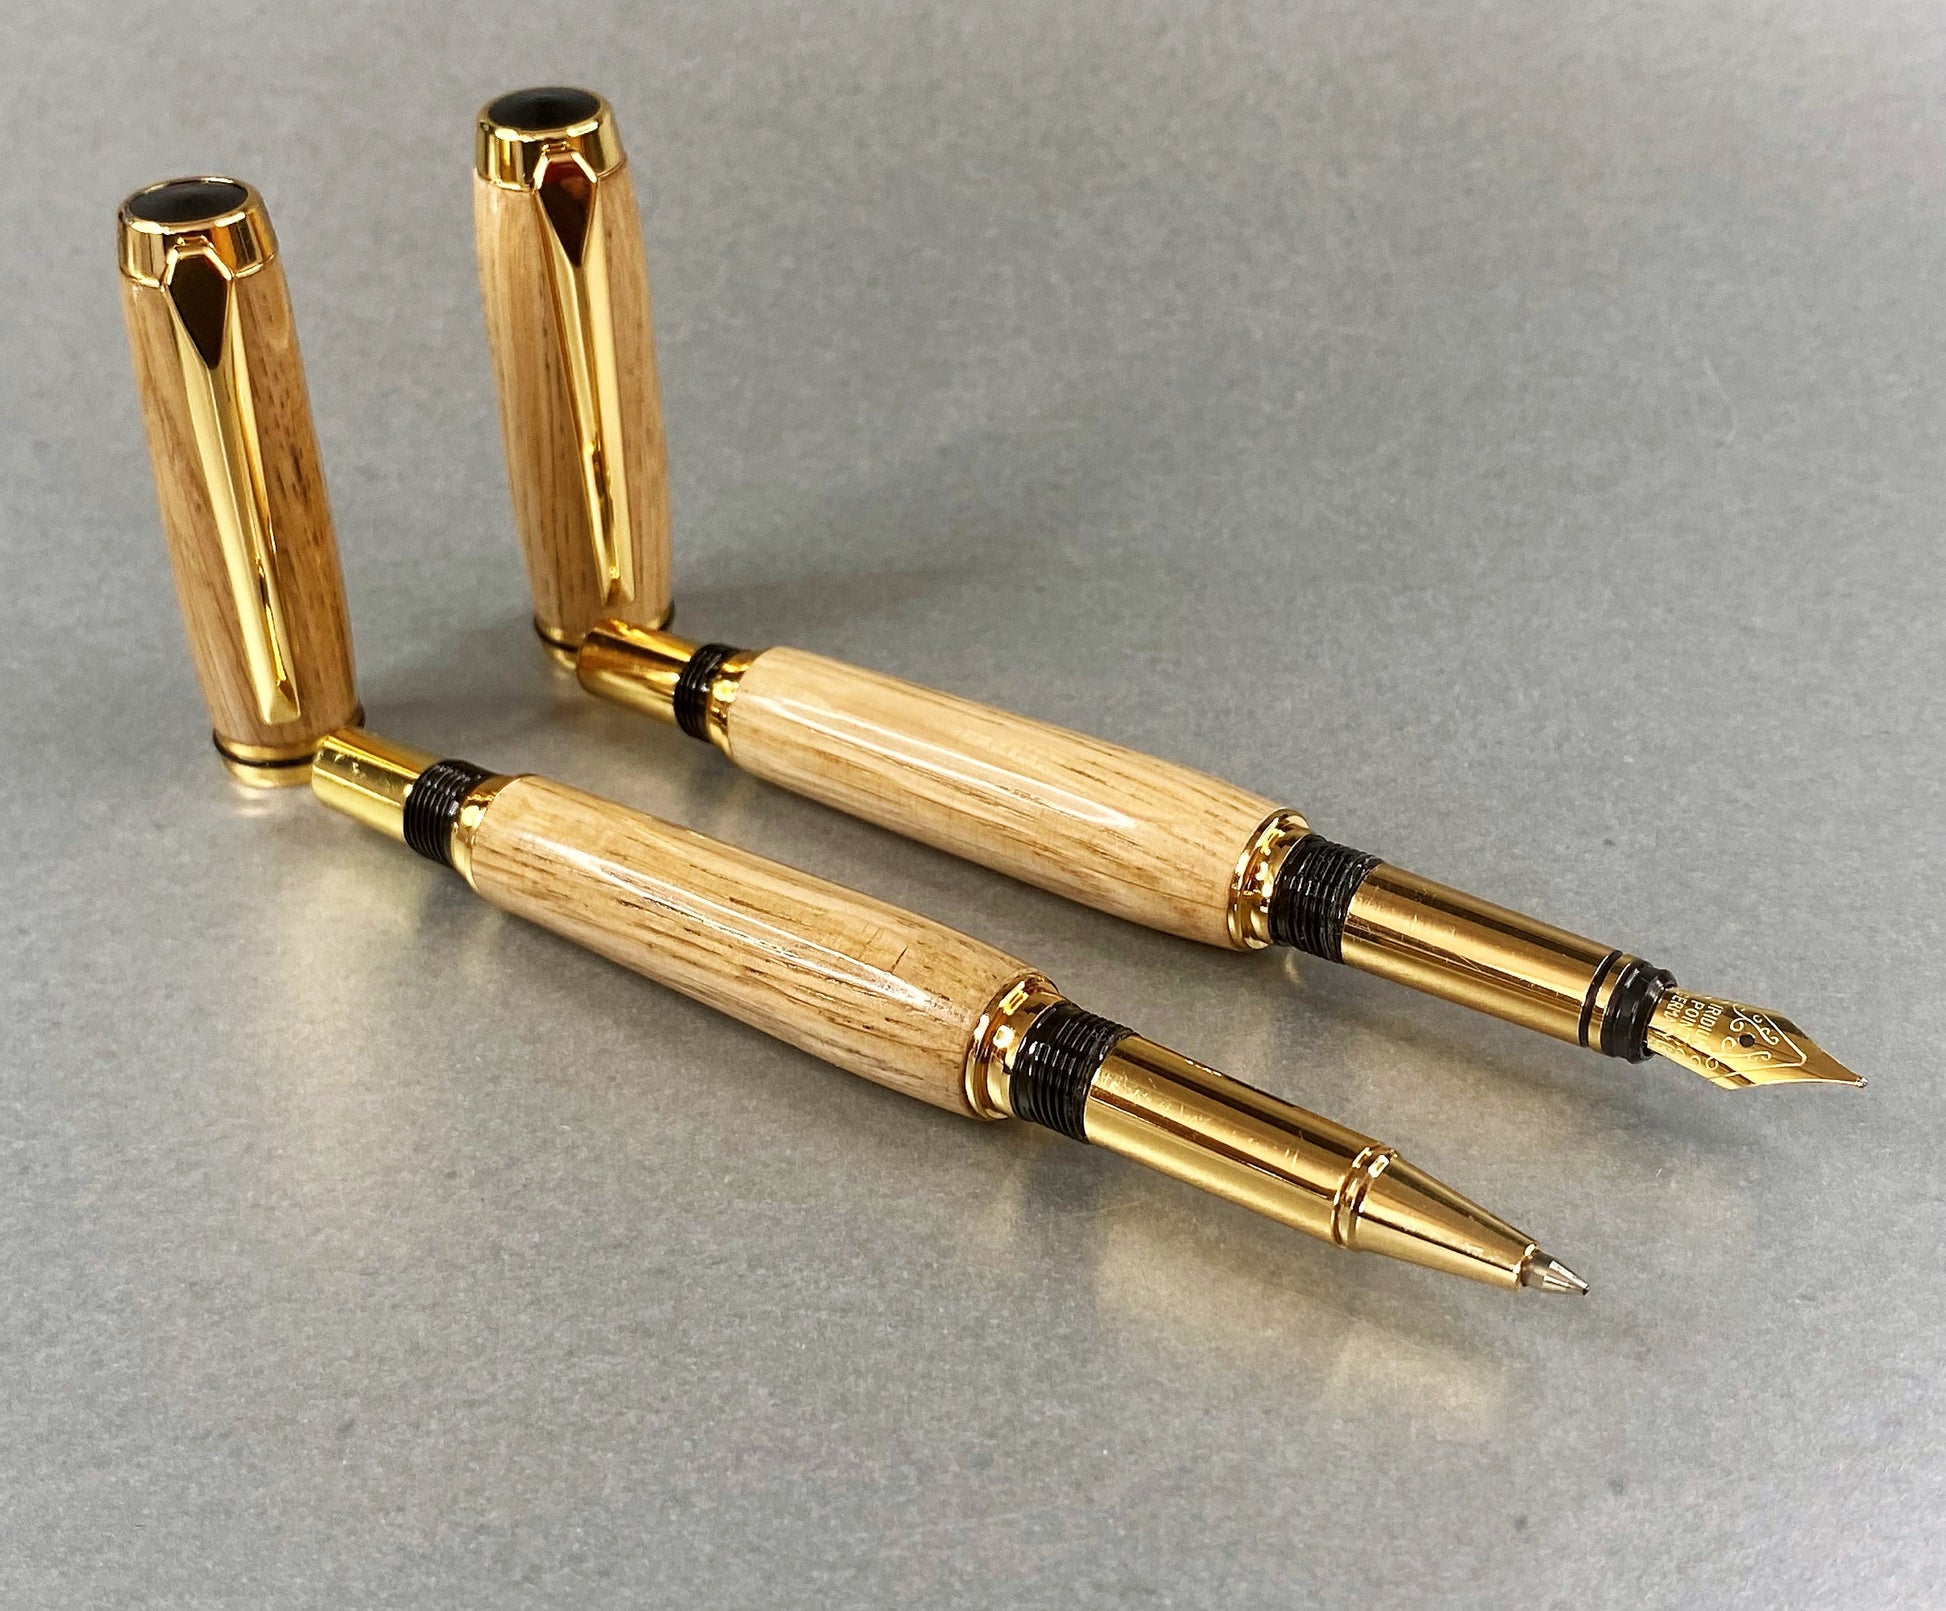 Two hand crafted and turned pens made from French Oak and has Gold Plated fittings, one is a fountain pen and the other is a Rollerball pen